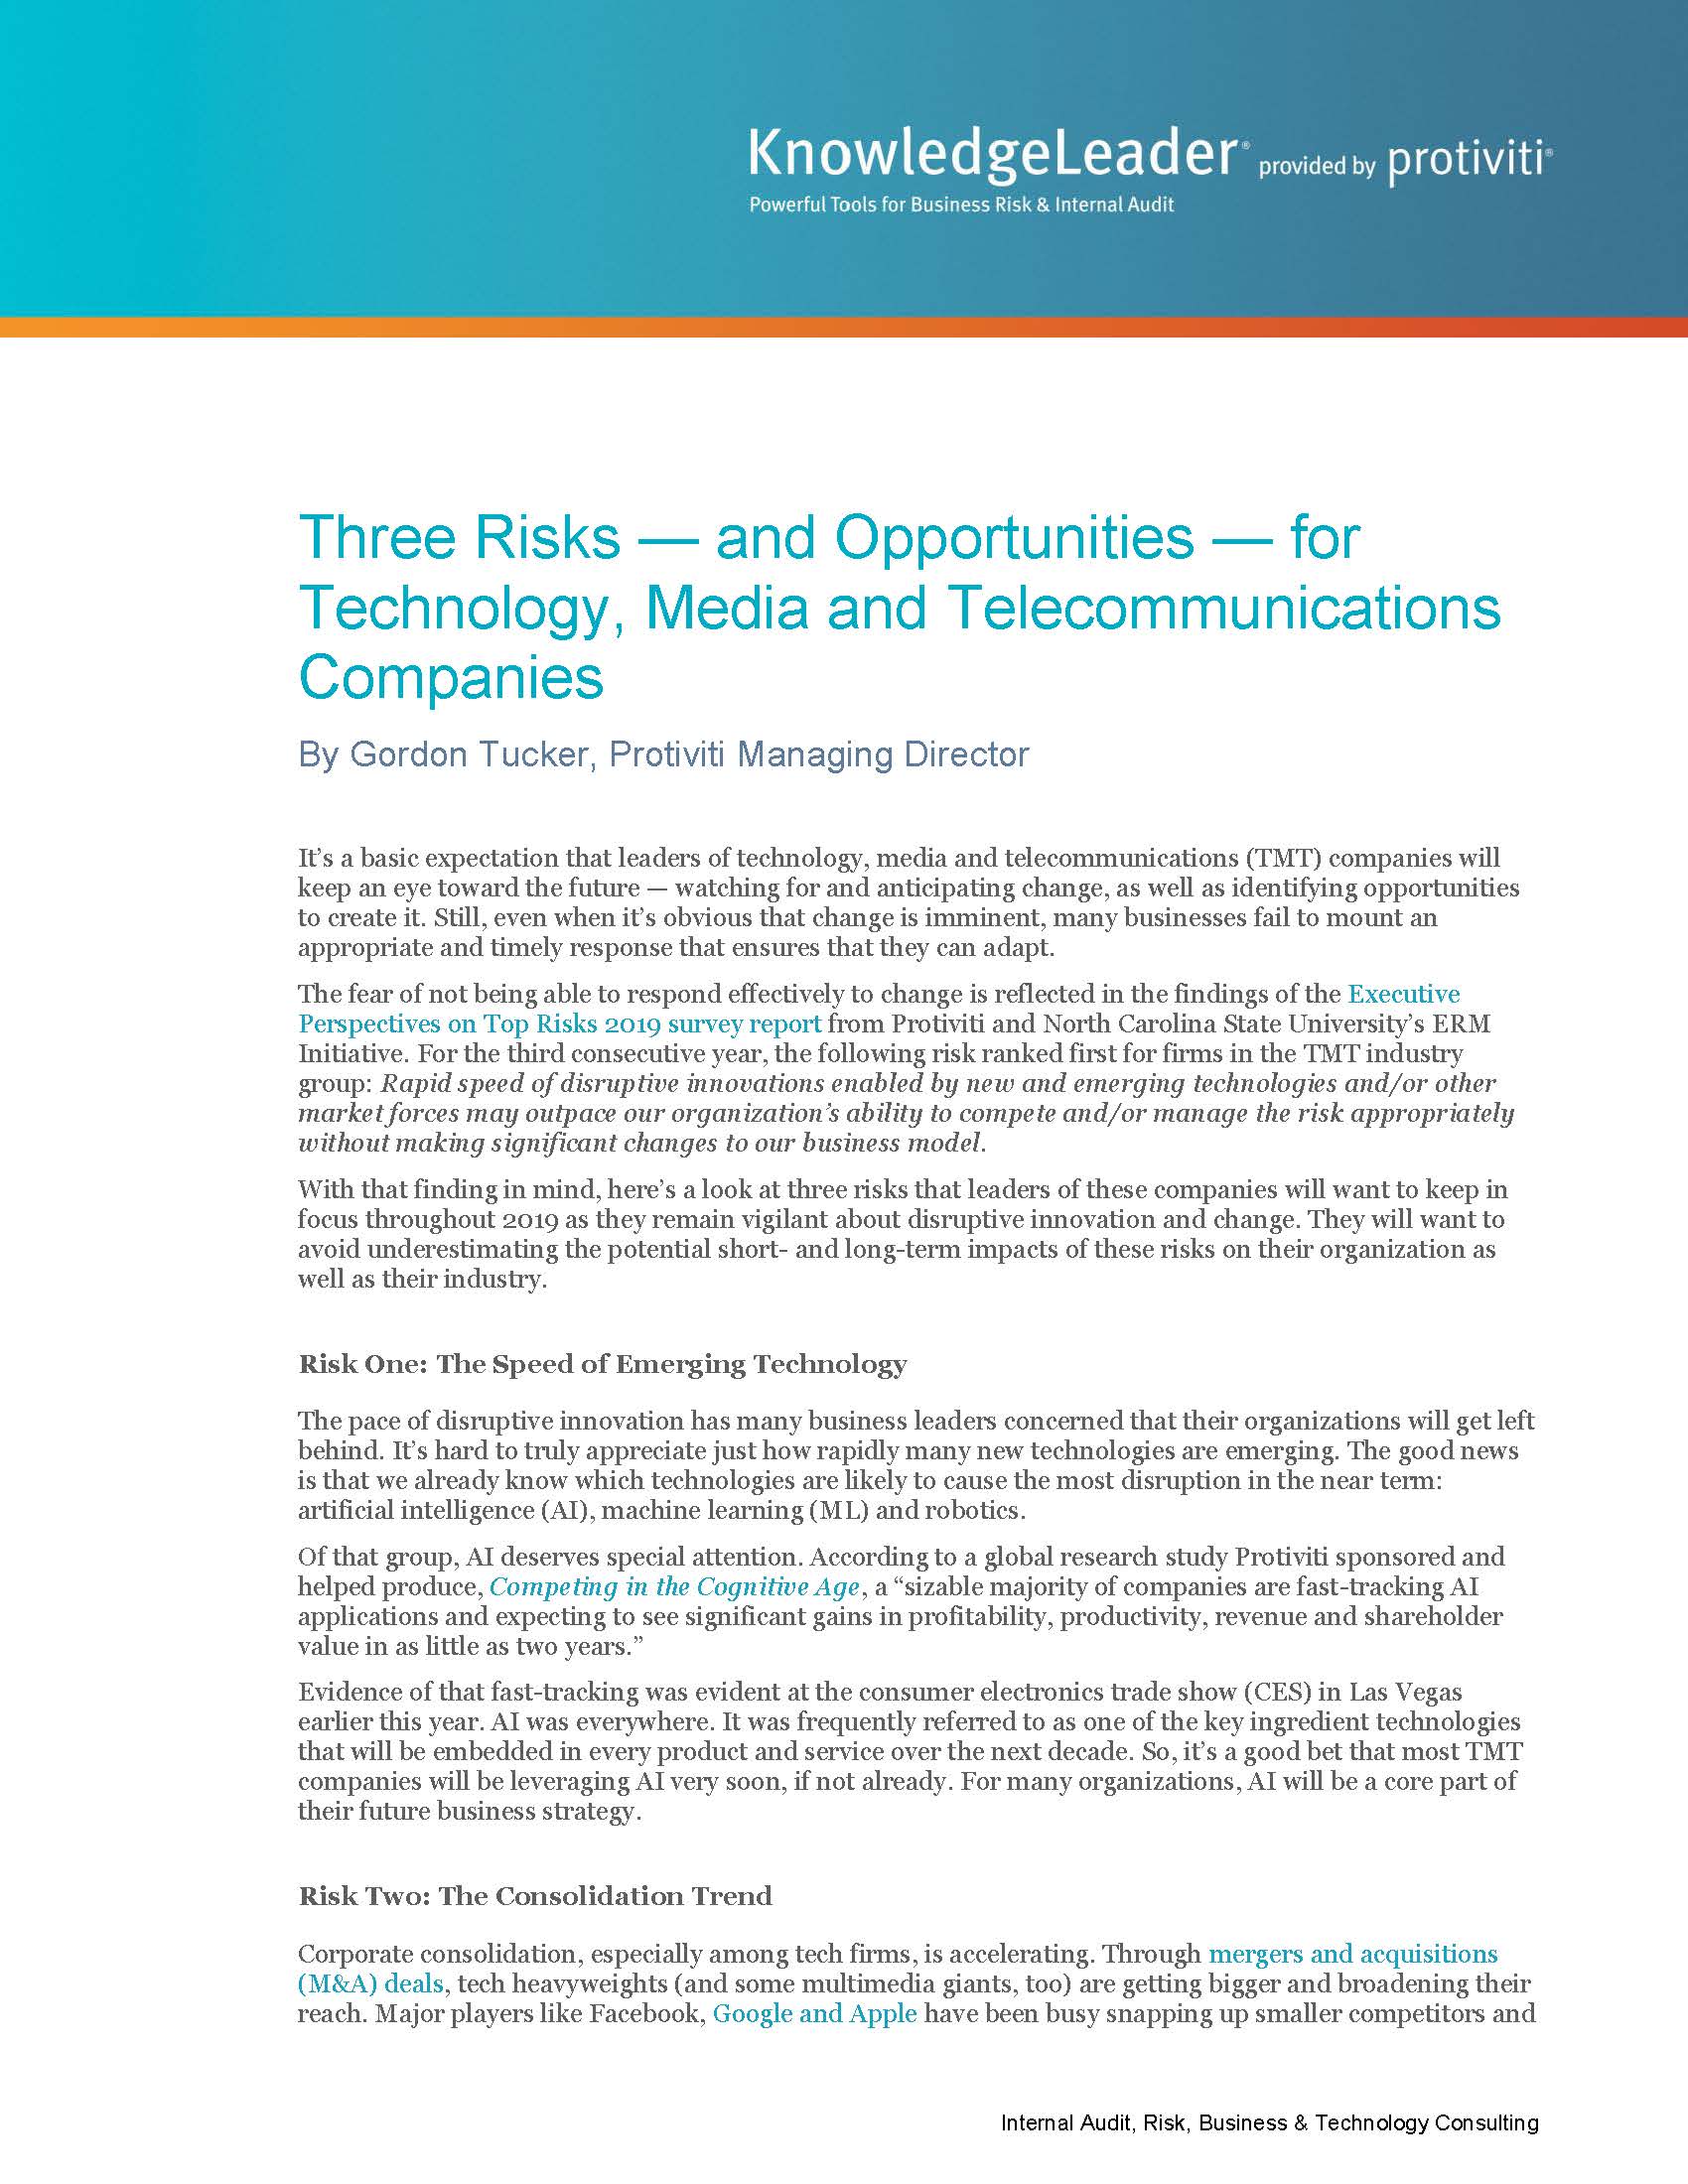 Screenshot of the first page of Three Risks and Opportunities for Technology, Media and Telecommunications Companies